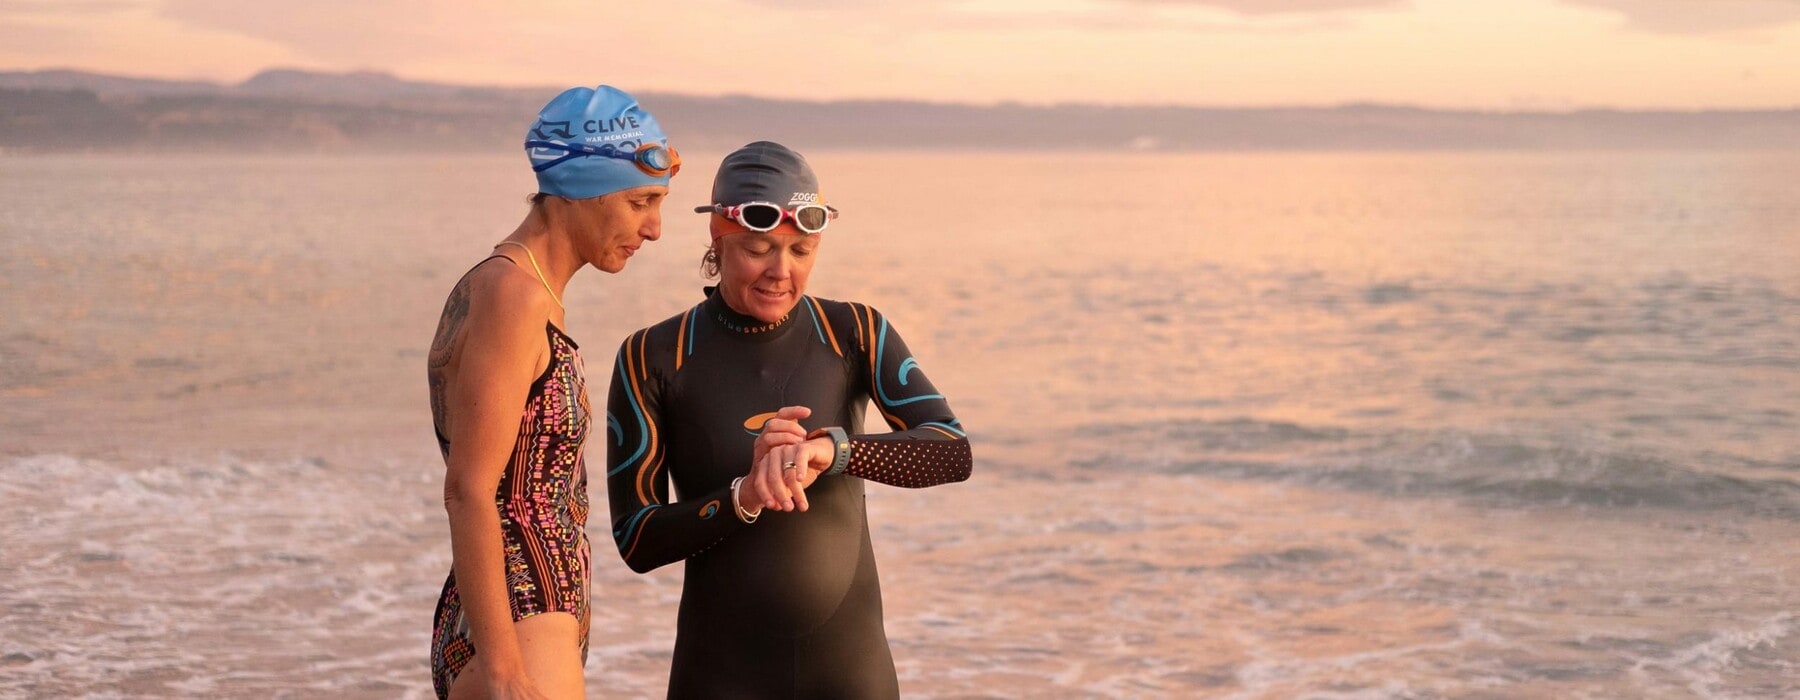 Two swimmers wearing swim suits and caps preparing to swim at the beach